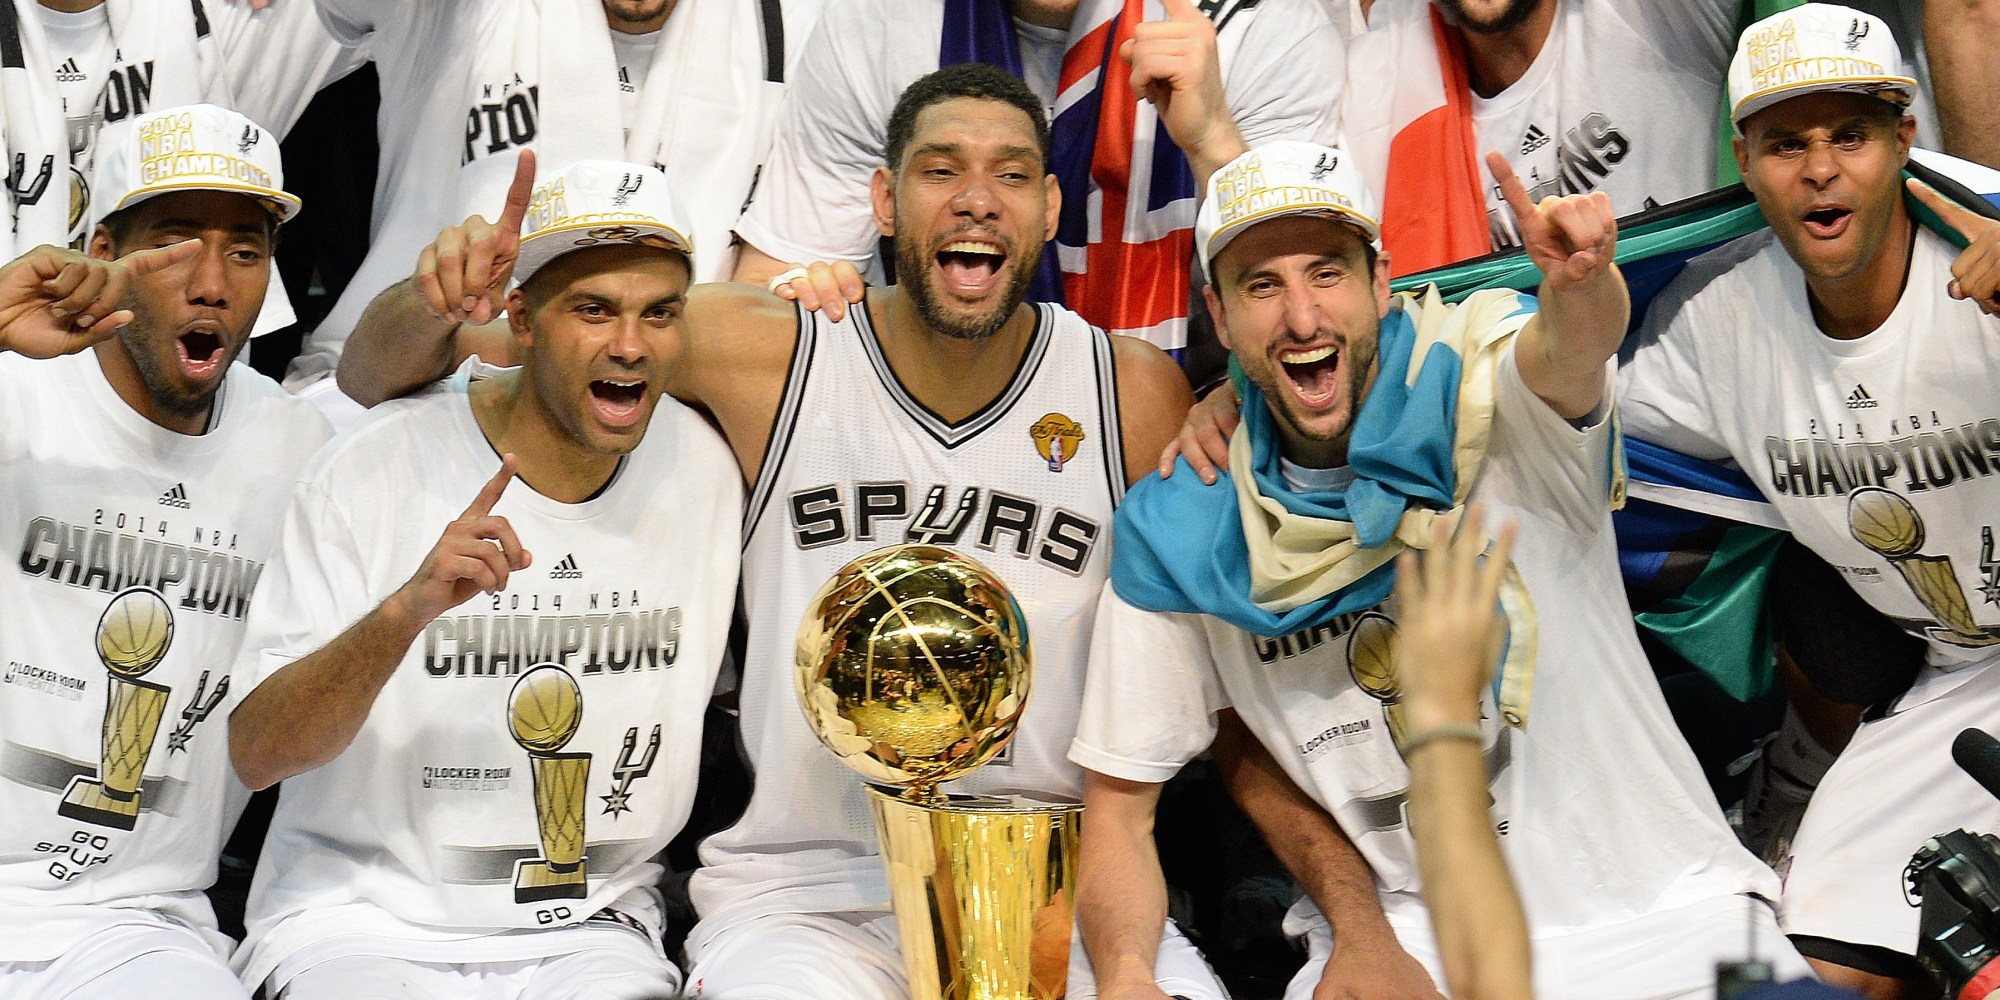 San Antonio Spurs Are Champions Again After Defeating Miami Heat In 2014 NBA Finals ...